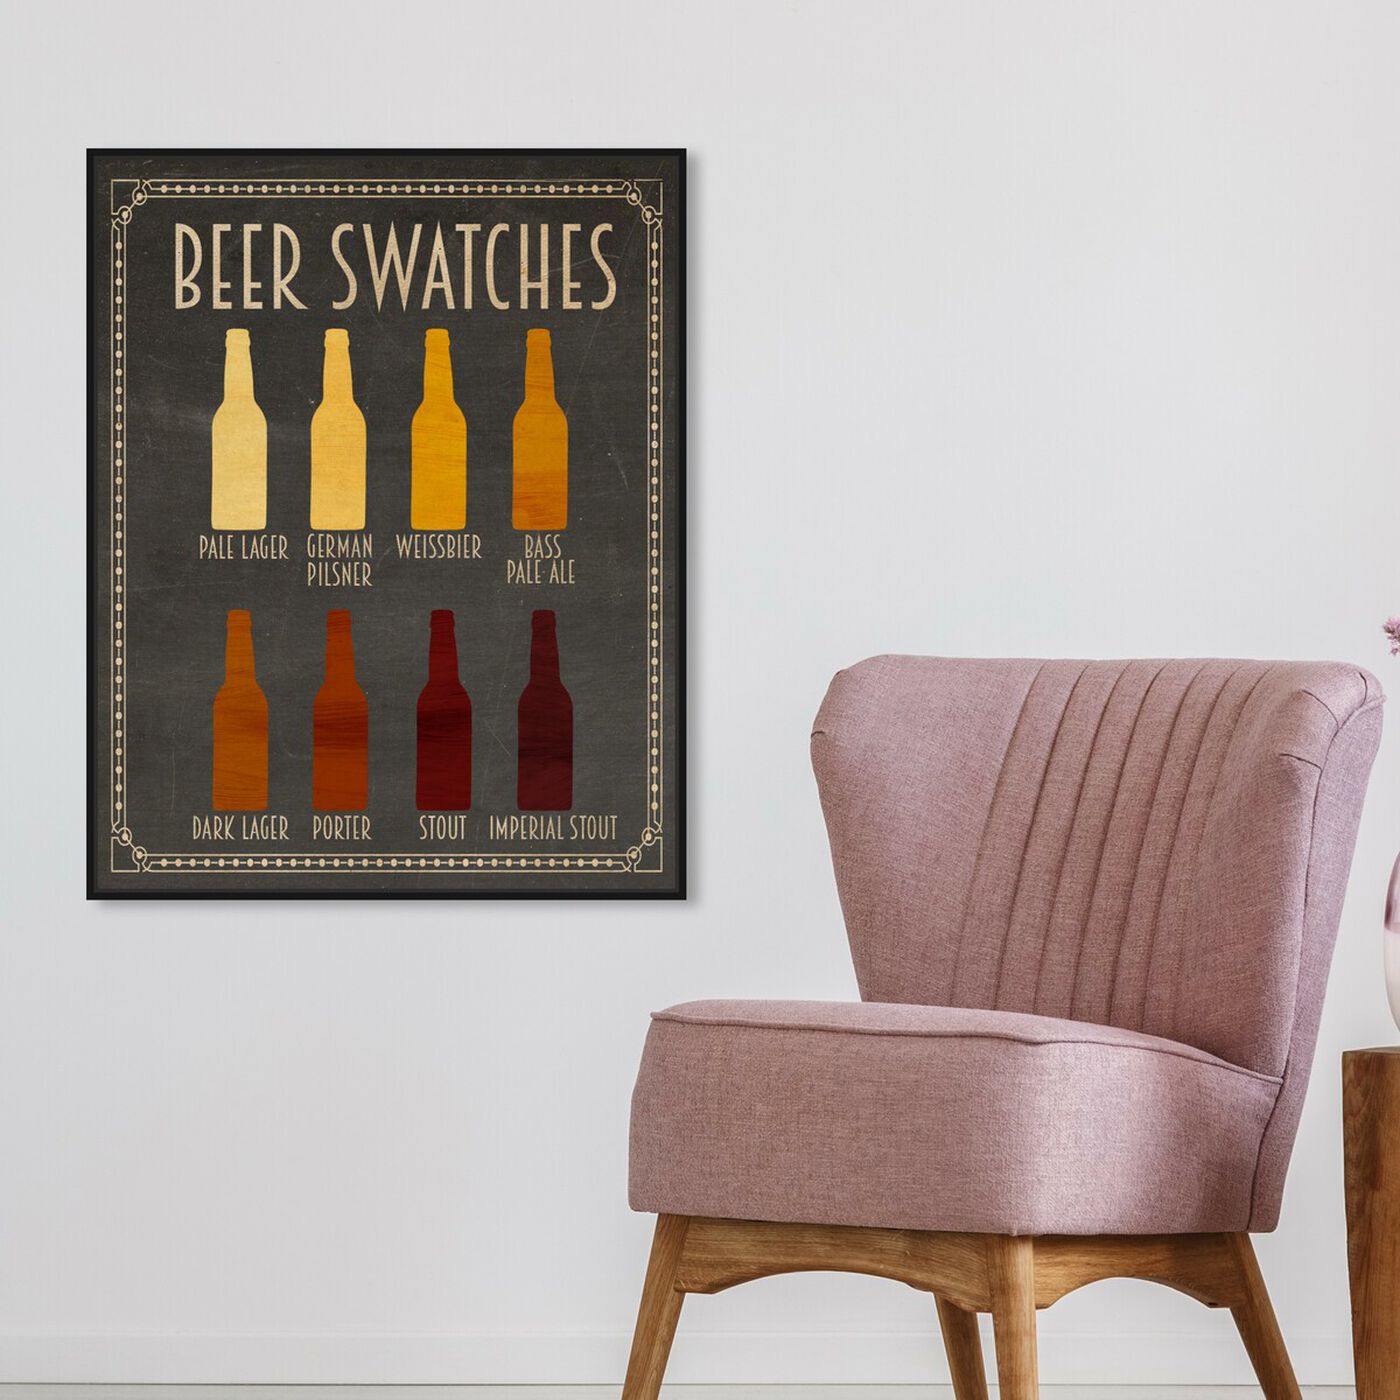 Hanging view of Beer Swatches featuring drinks and spirits and beer art.